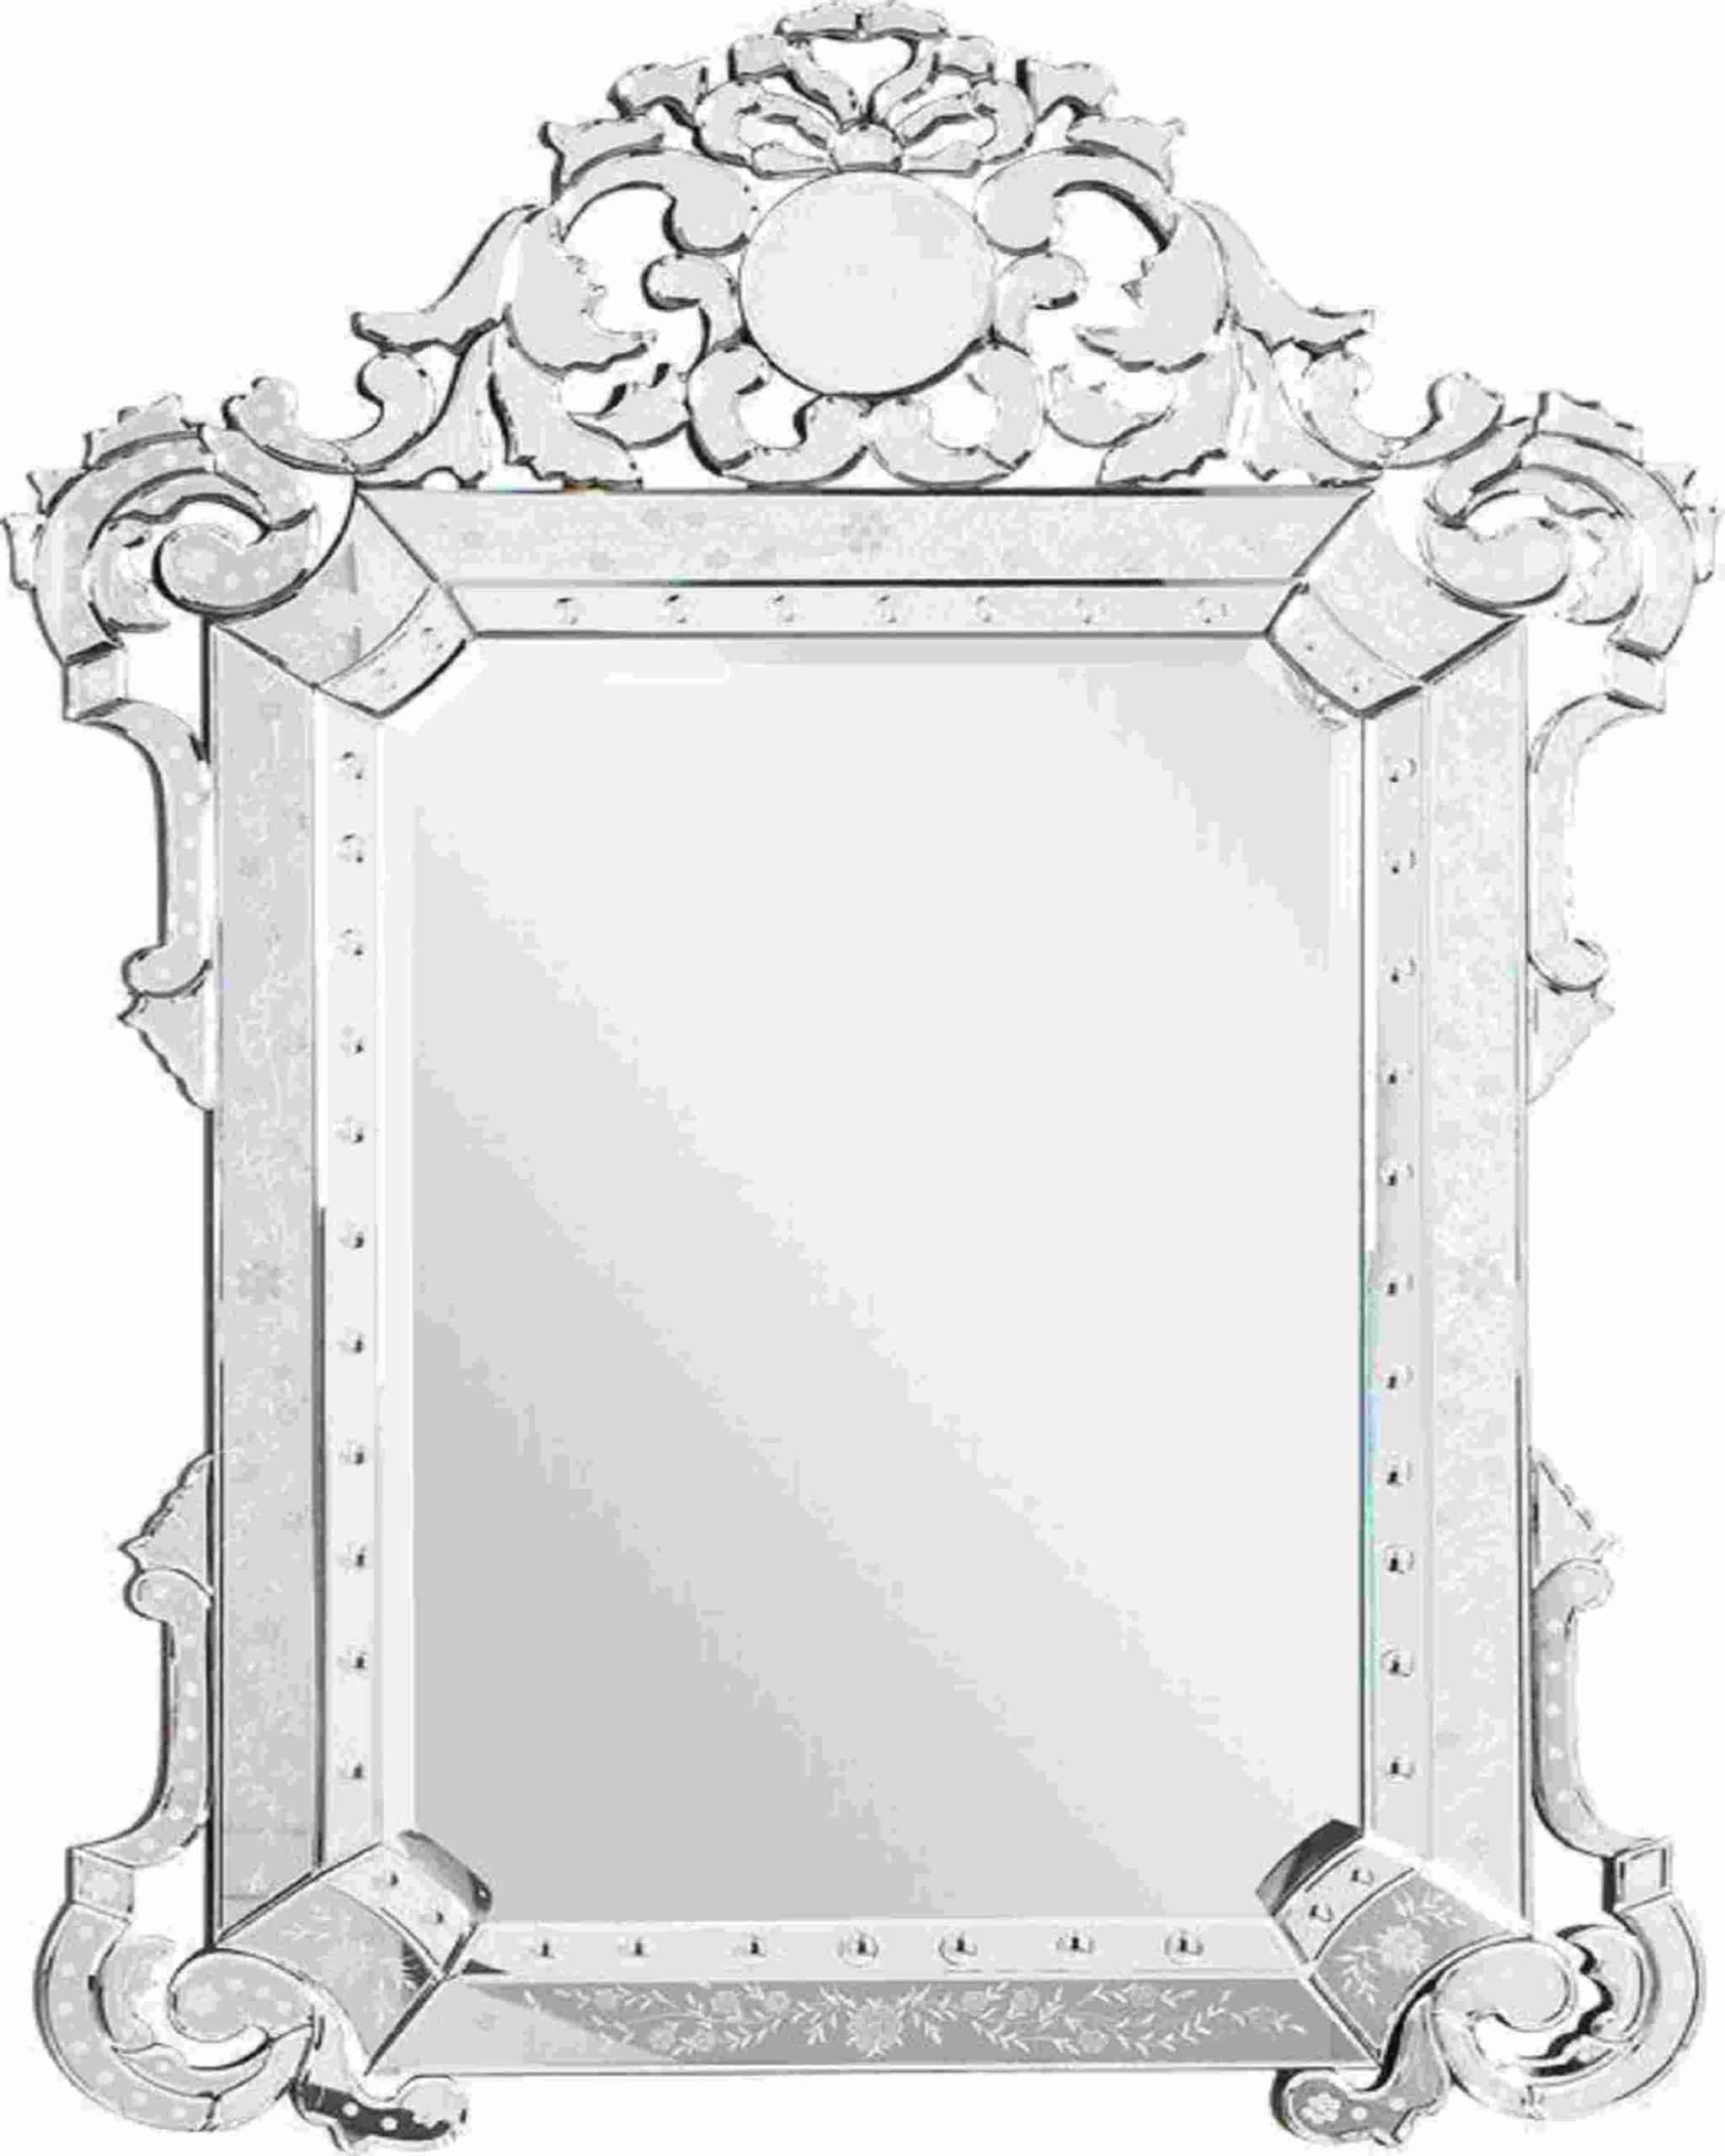 CRAFT-VENETIAN-MIRROR-ANGIE-S-INDIA-ANGHI-HOMES-1618387588-compressed